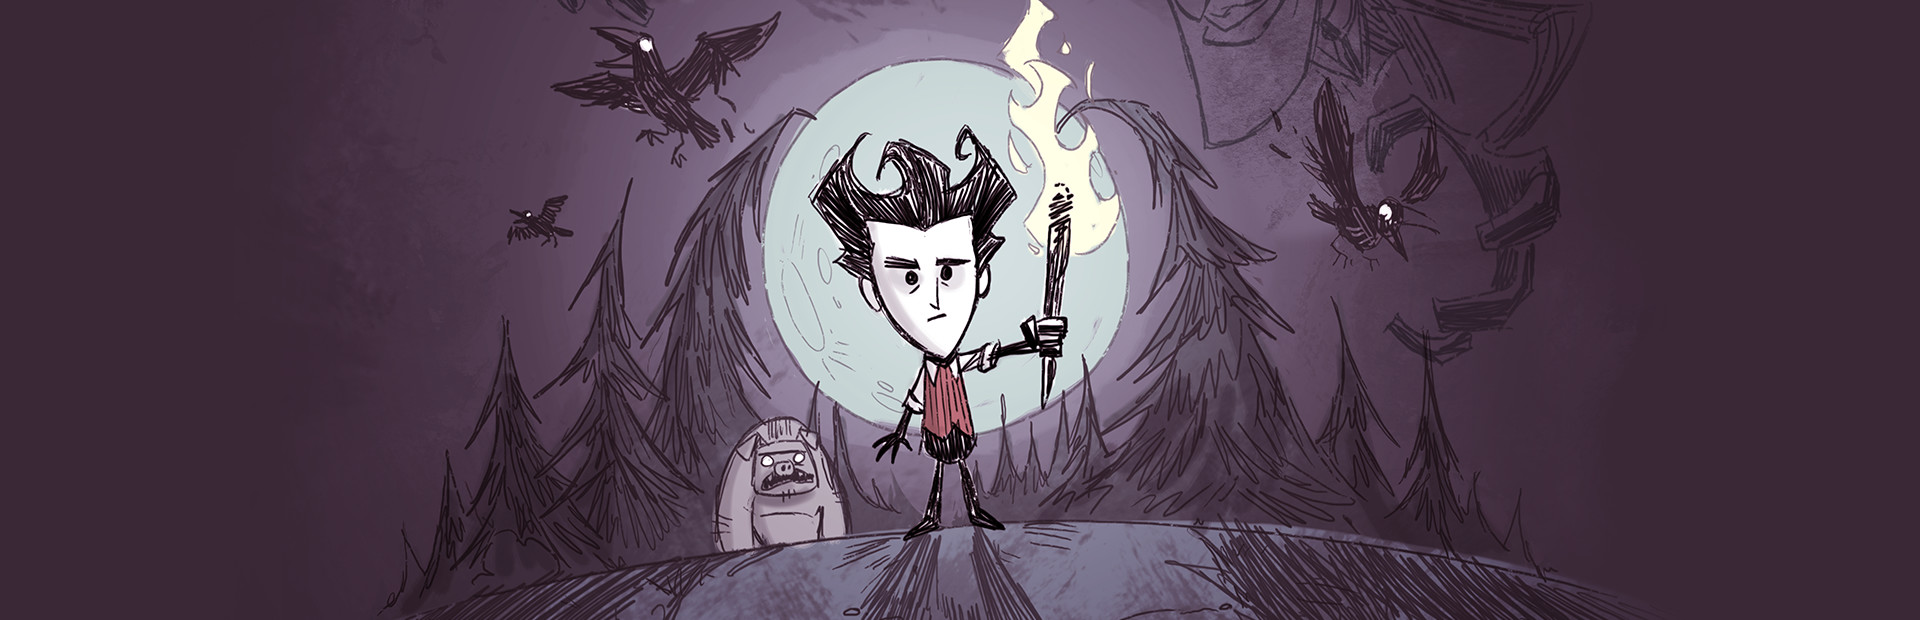 Don't Starve cover image